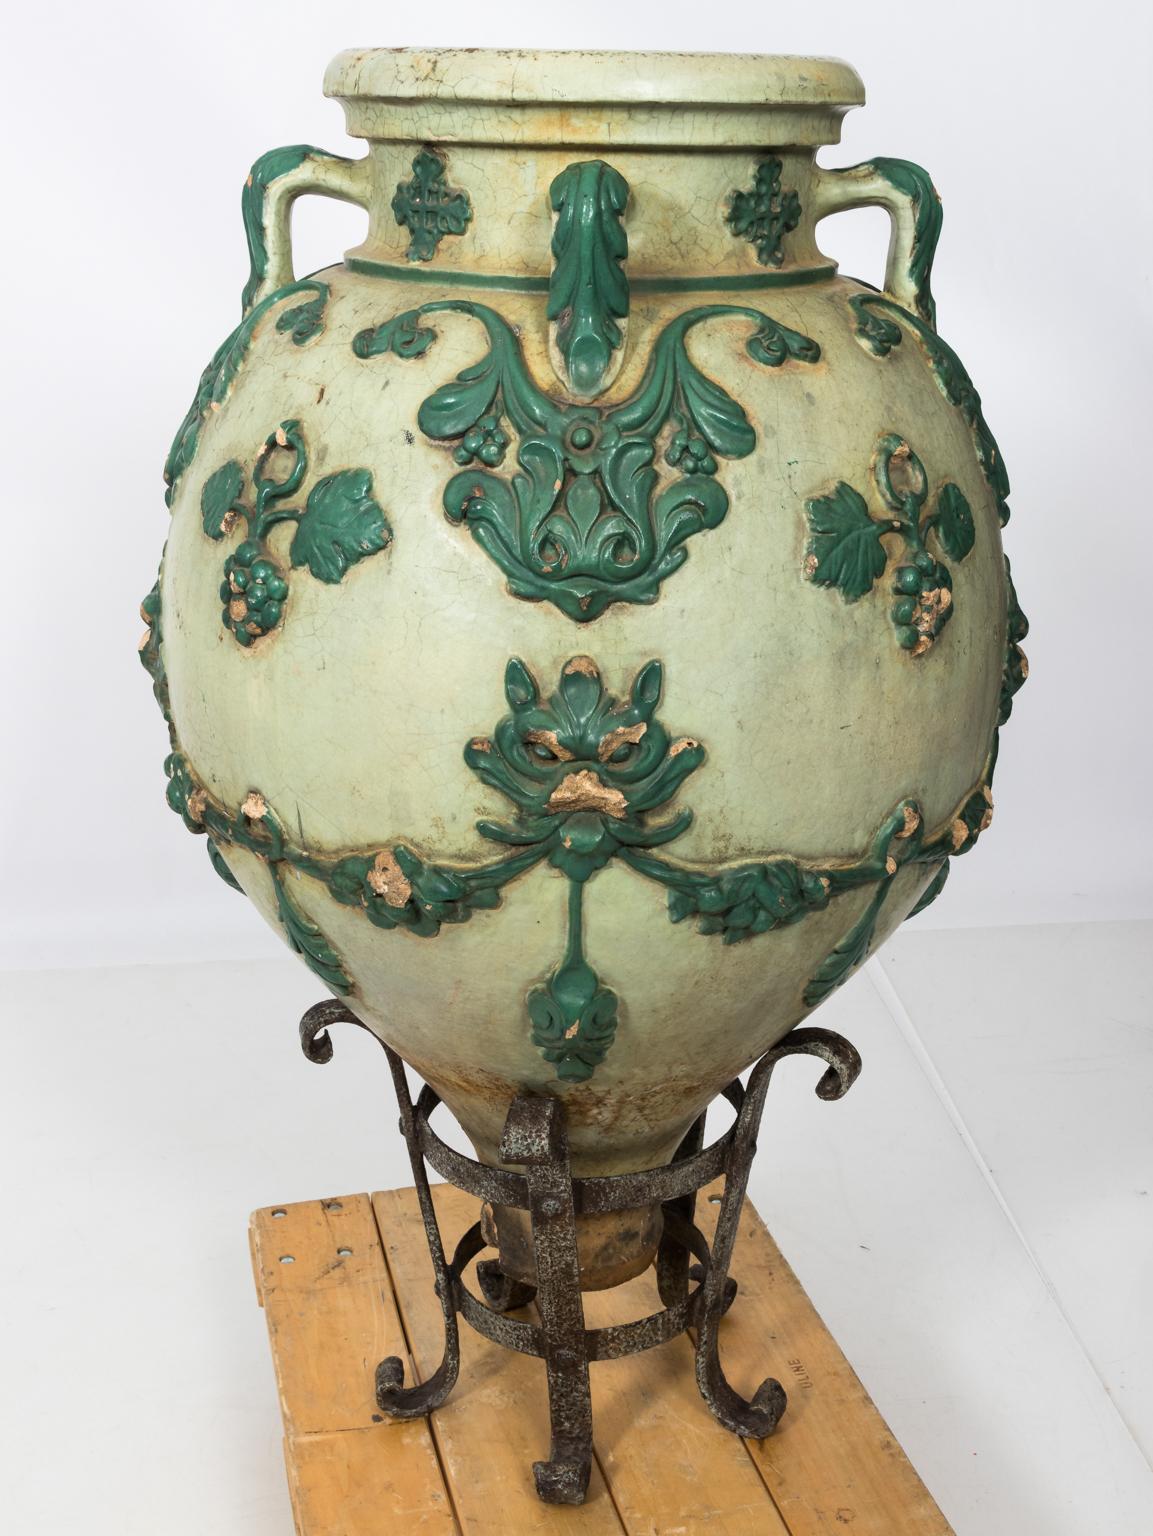 Polychrome terracotta pots in the Renaissance Revival style, hand forged iron ring bases by the Galloway terracotta company, circa 1880s. Please note of some chipping of high surfaces consistent with aging.
 